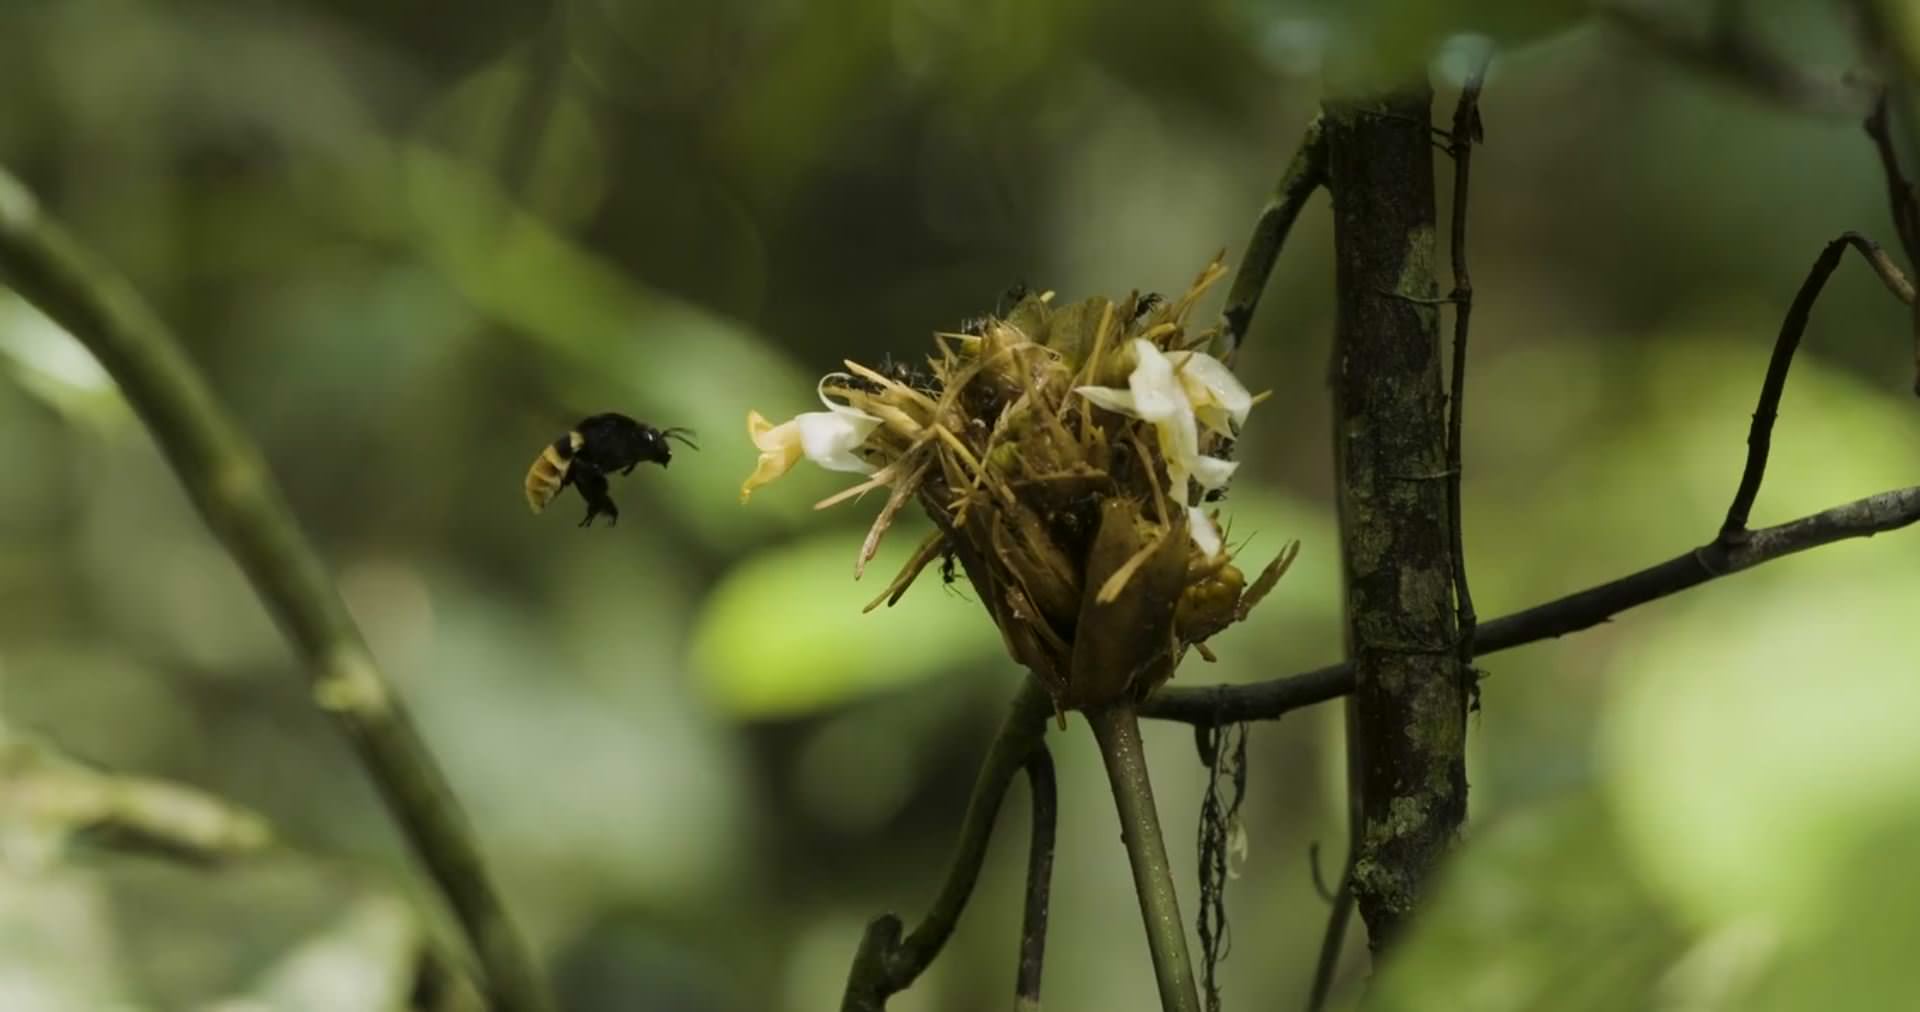 This image shows a bee flying towards a flower as part of junglekeepers film